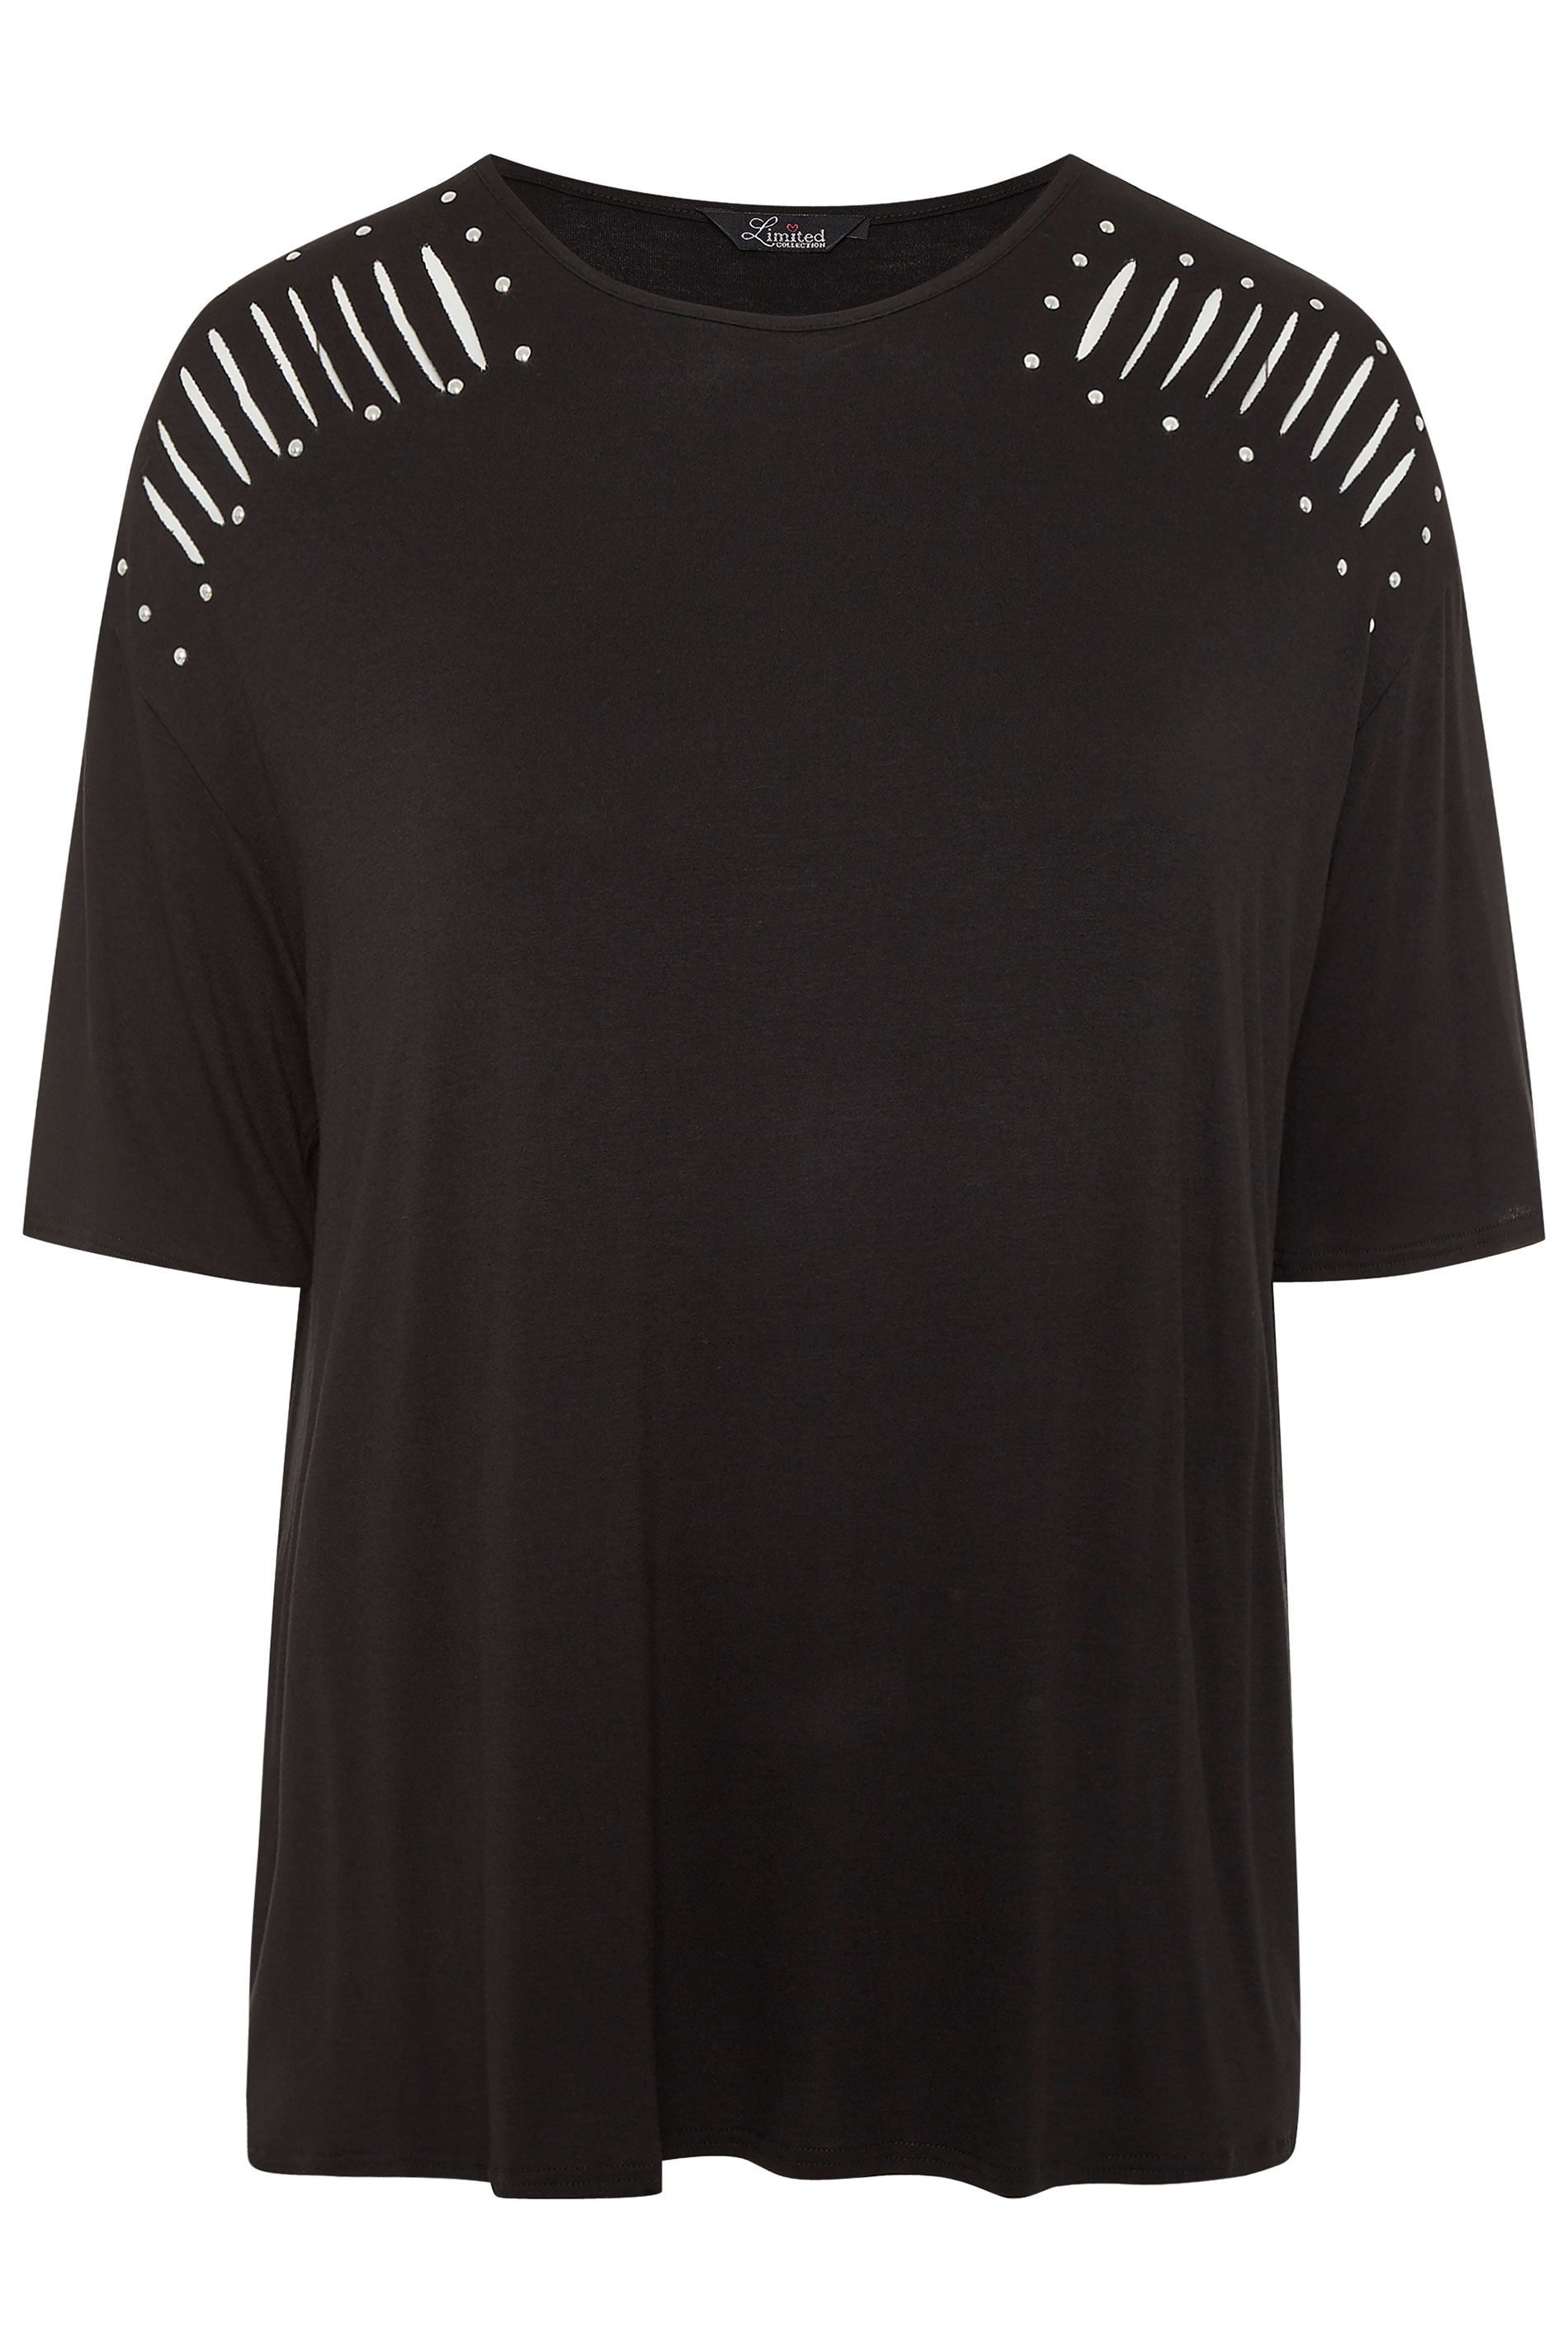 LIMITED COLLECTION Black Stud Laser Cut Top | Yours Clothing